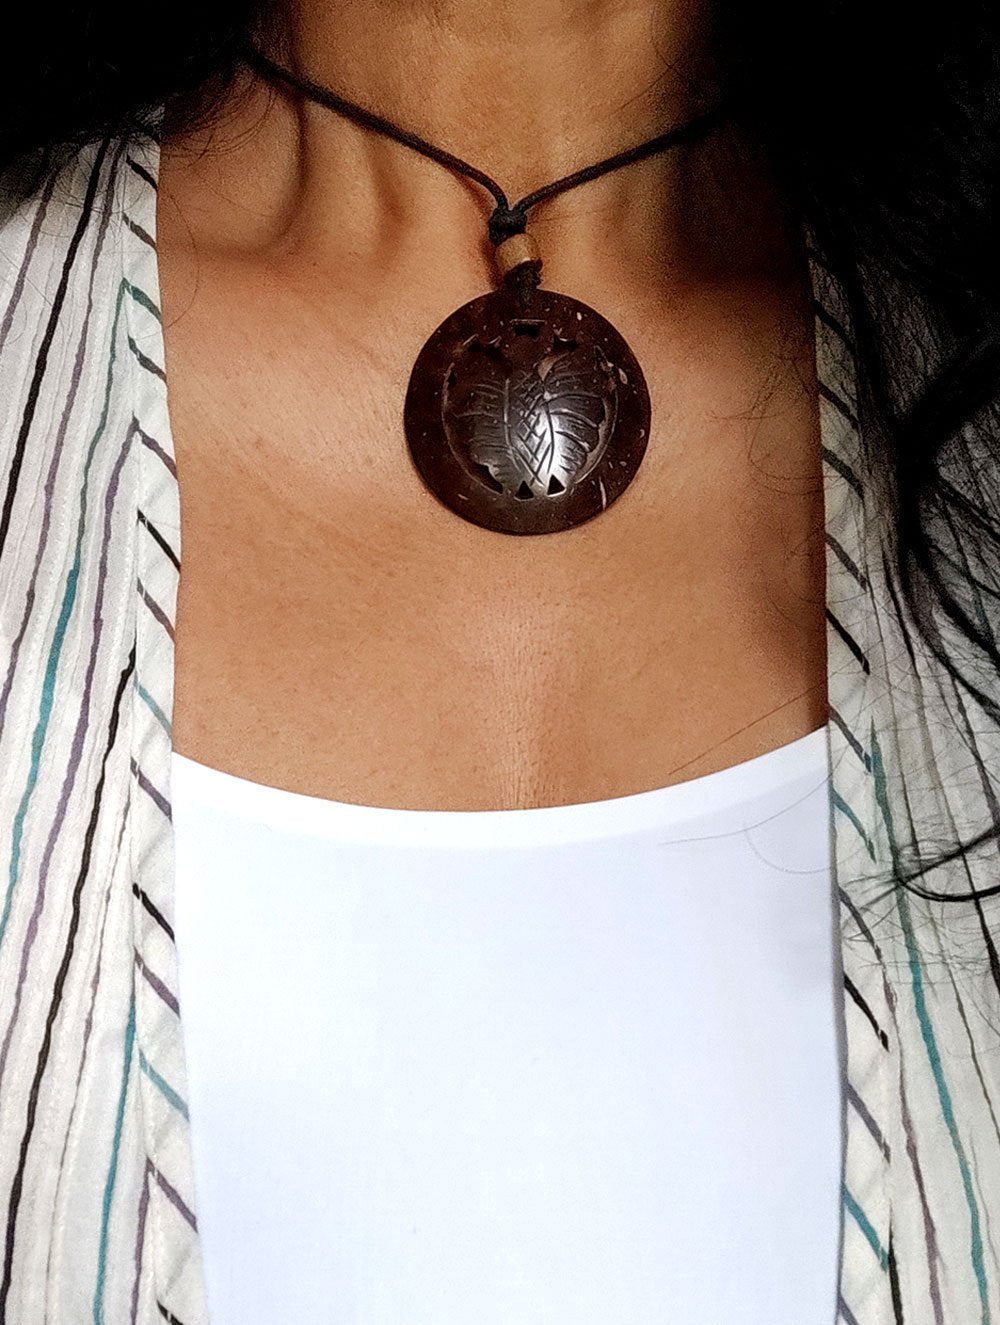 Load image into Gallery viewer, Handcrafted Coconut Shell Pendant on Thread - Butterfly